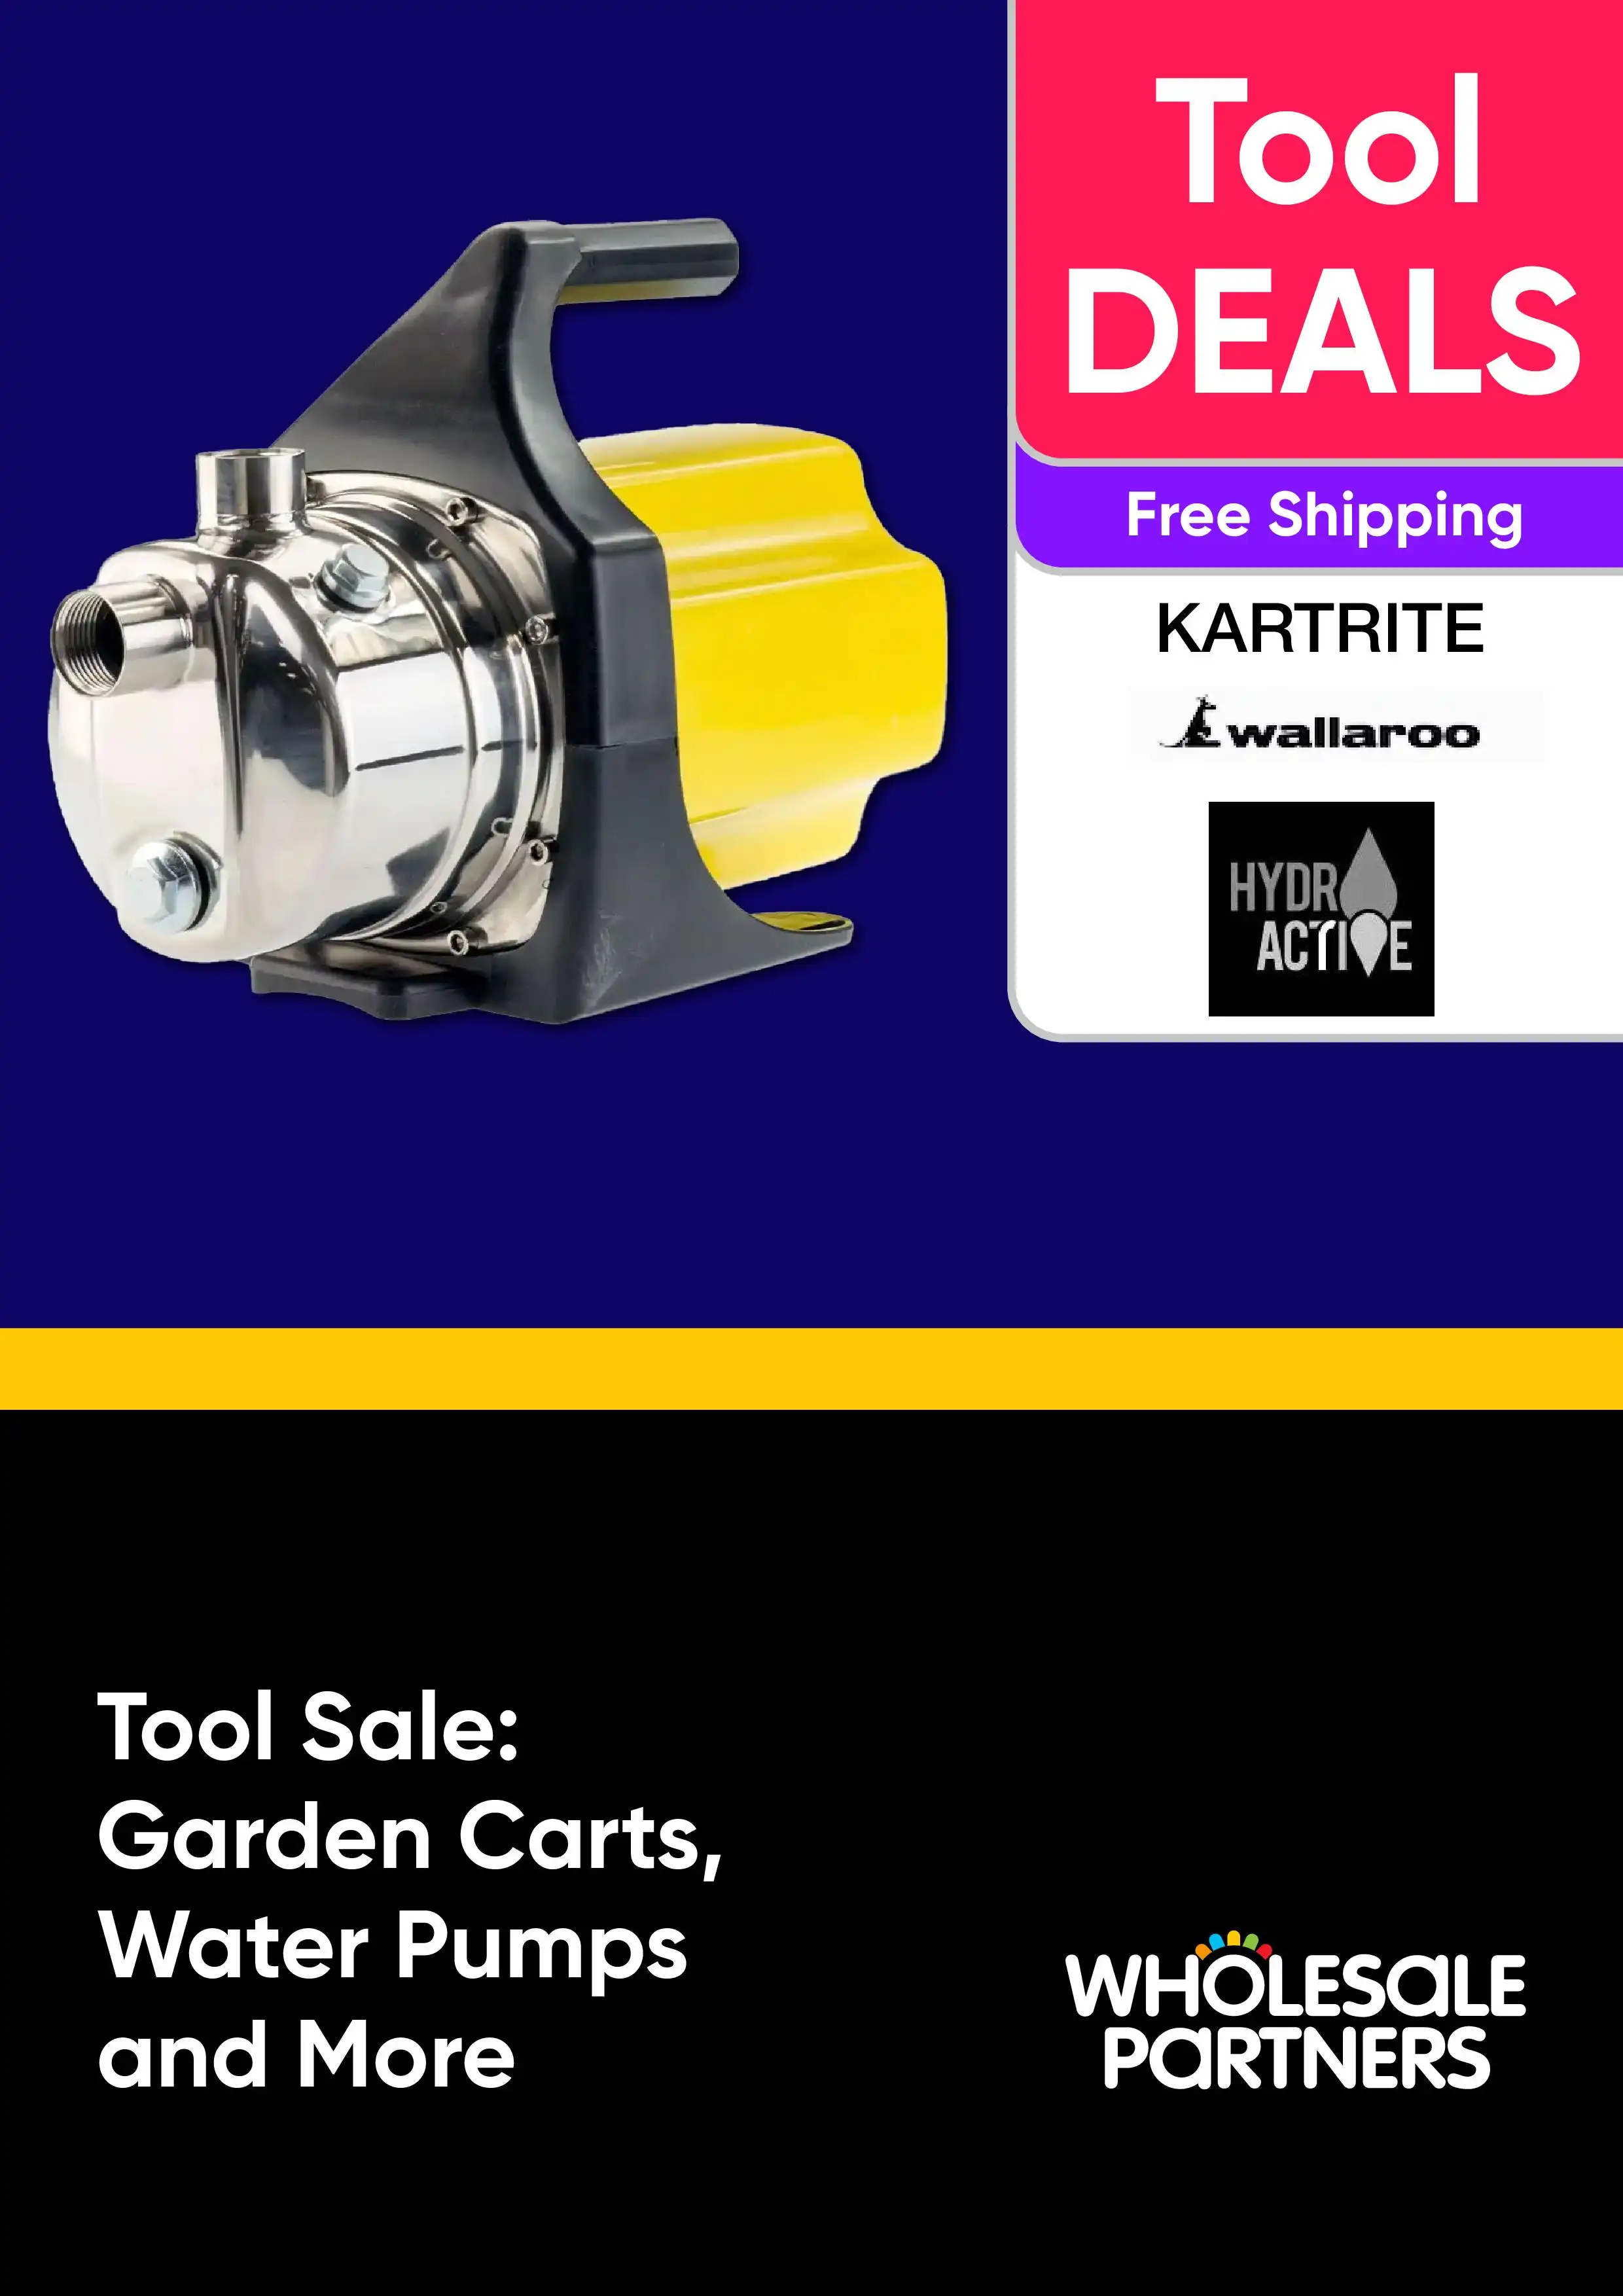 Tool Sale - Garden Carts, Water Pumps and More - Kartrite, Wallaroo, Hydra Active - Free Shipping